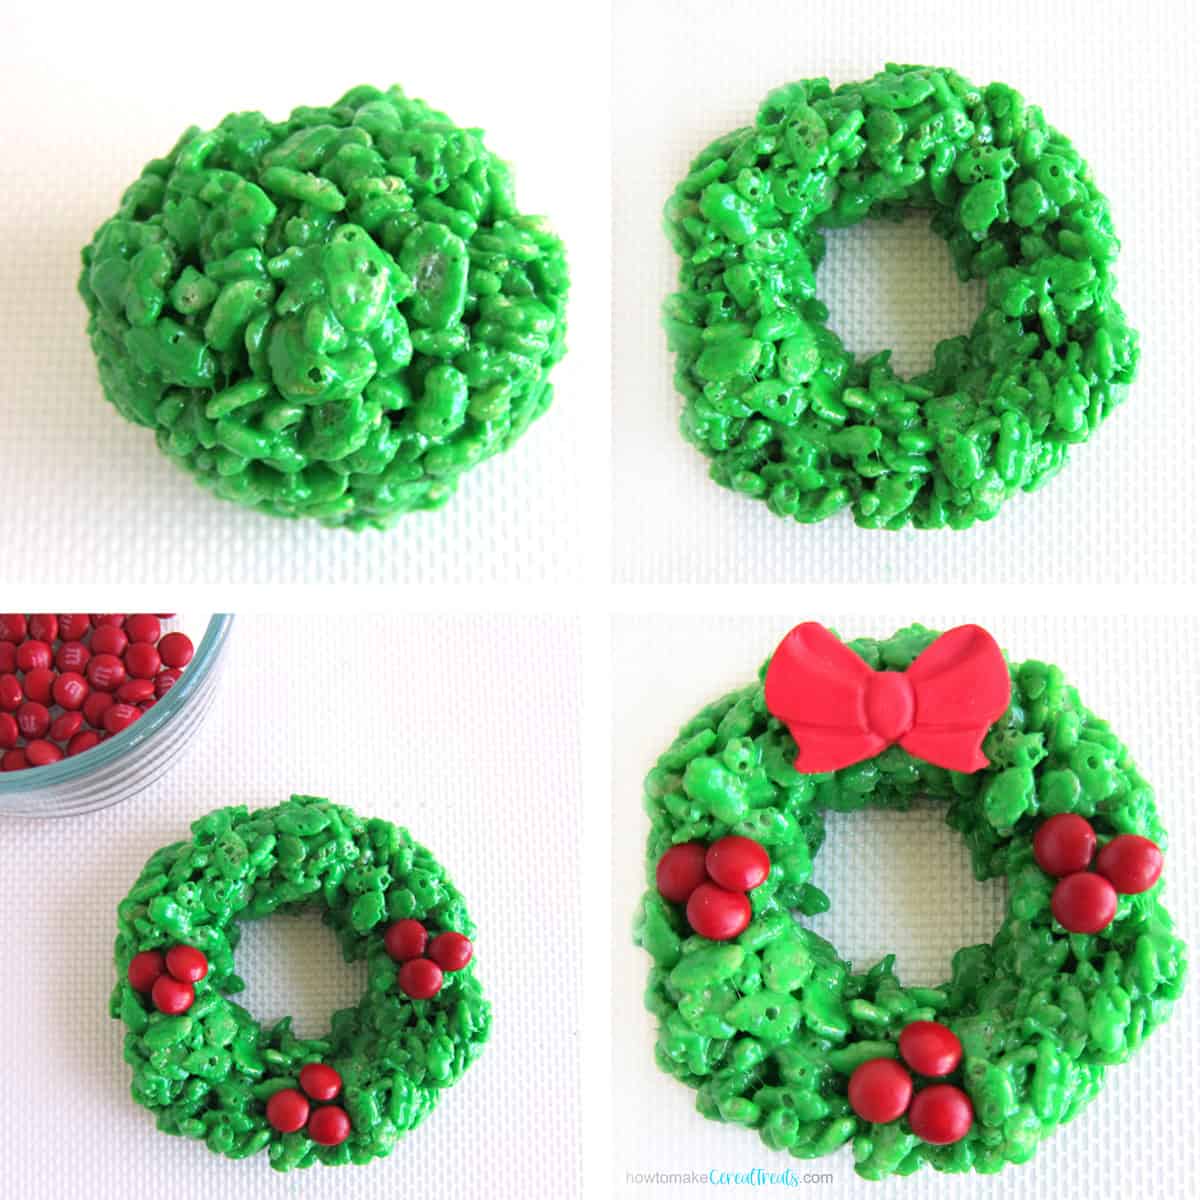 Green rice crispy treat ball shaped into a wreath decorated with mini red candies and a red modeling chocolate bow.